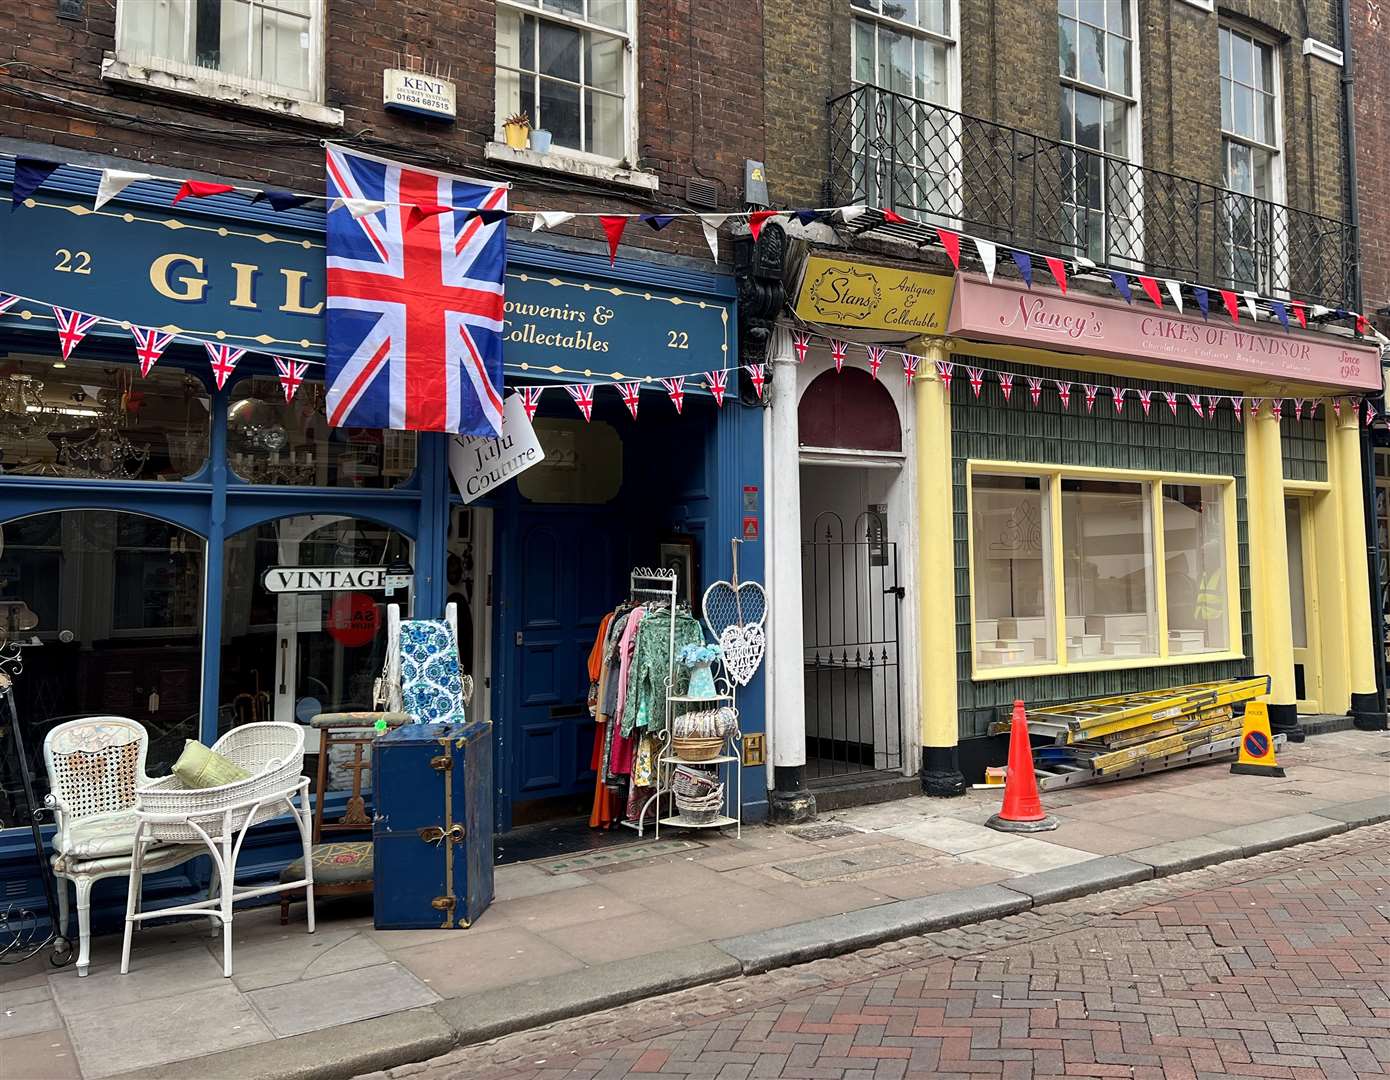 Rochester High Street is being transformed into ‘Windsor’ for Netflix filming. Picture: Megan Carr